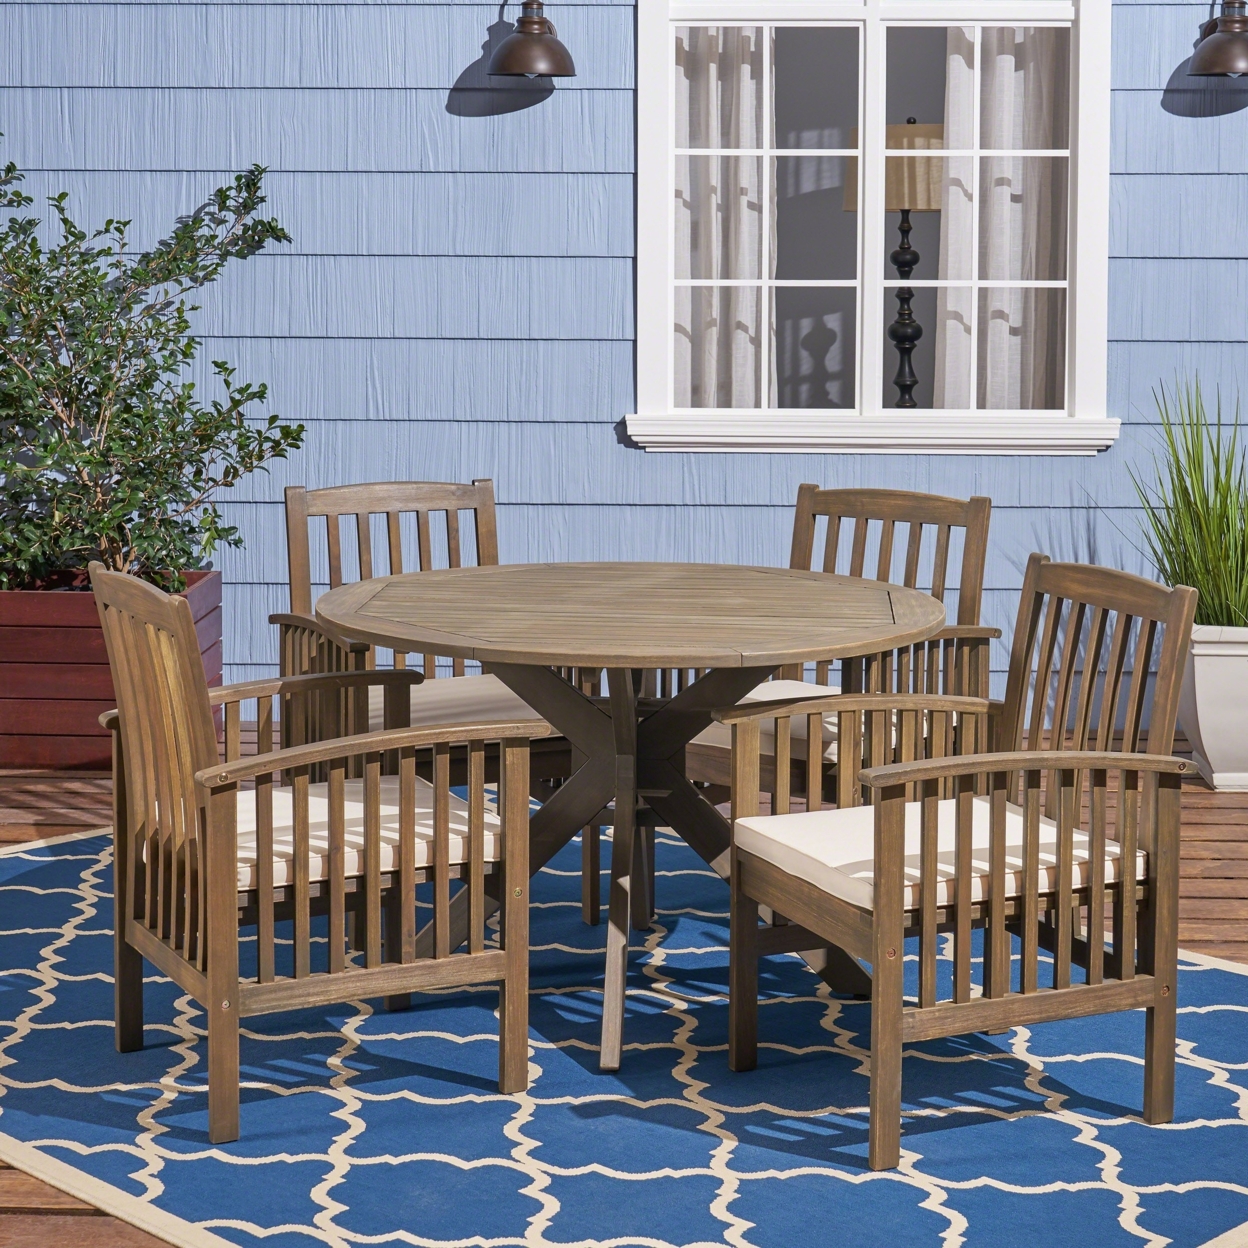 Phoenix Outdoor Acacia 4-Seater Dining Set With Cushions And 47 Round Table With X-Legs - Gray / Cream